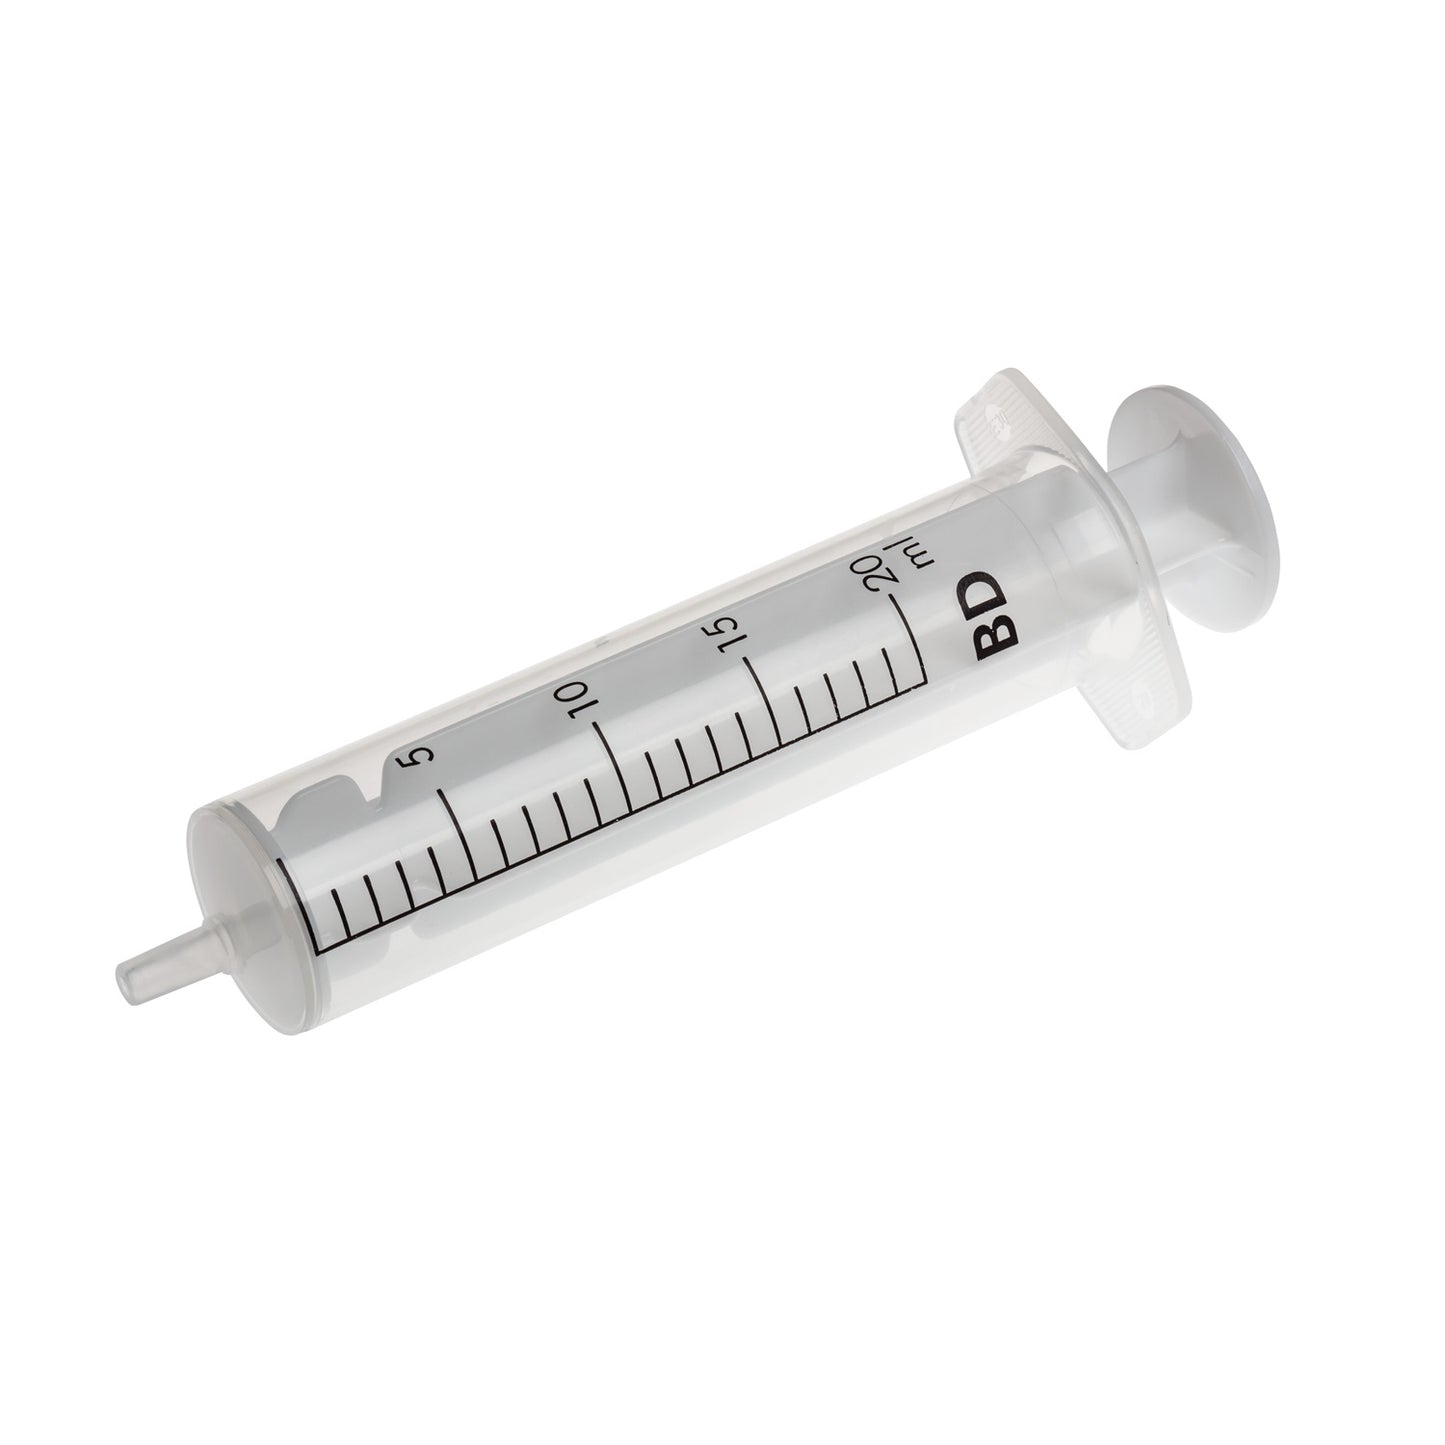 Bd Discardit Ii Disposable Syringes With Luer Connector   2-Piece